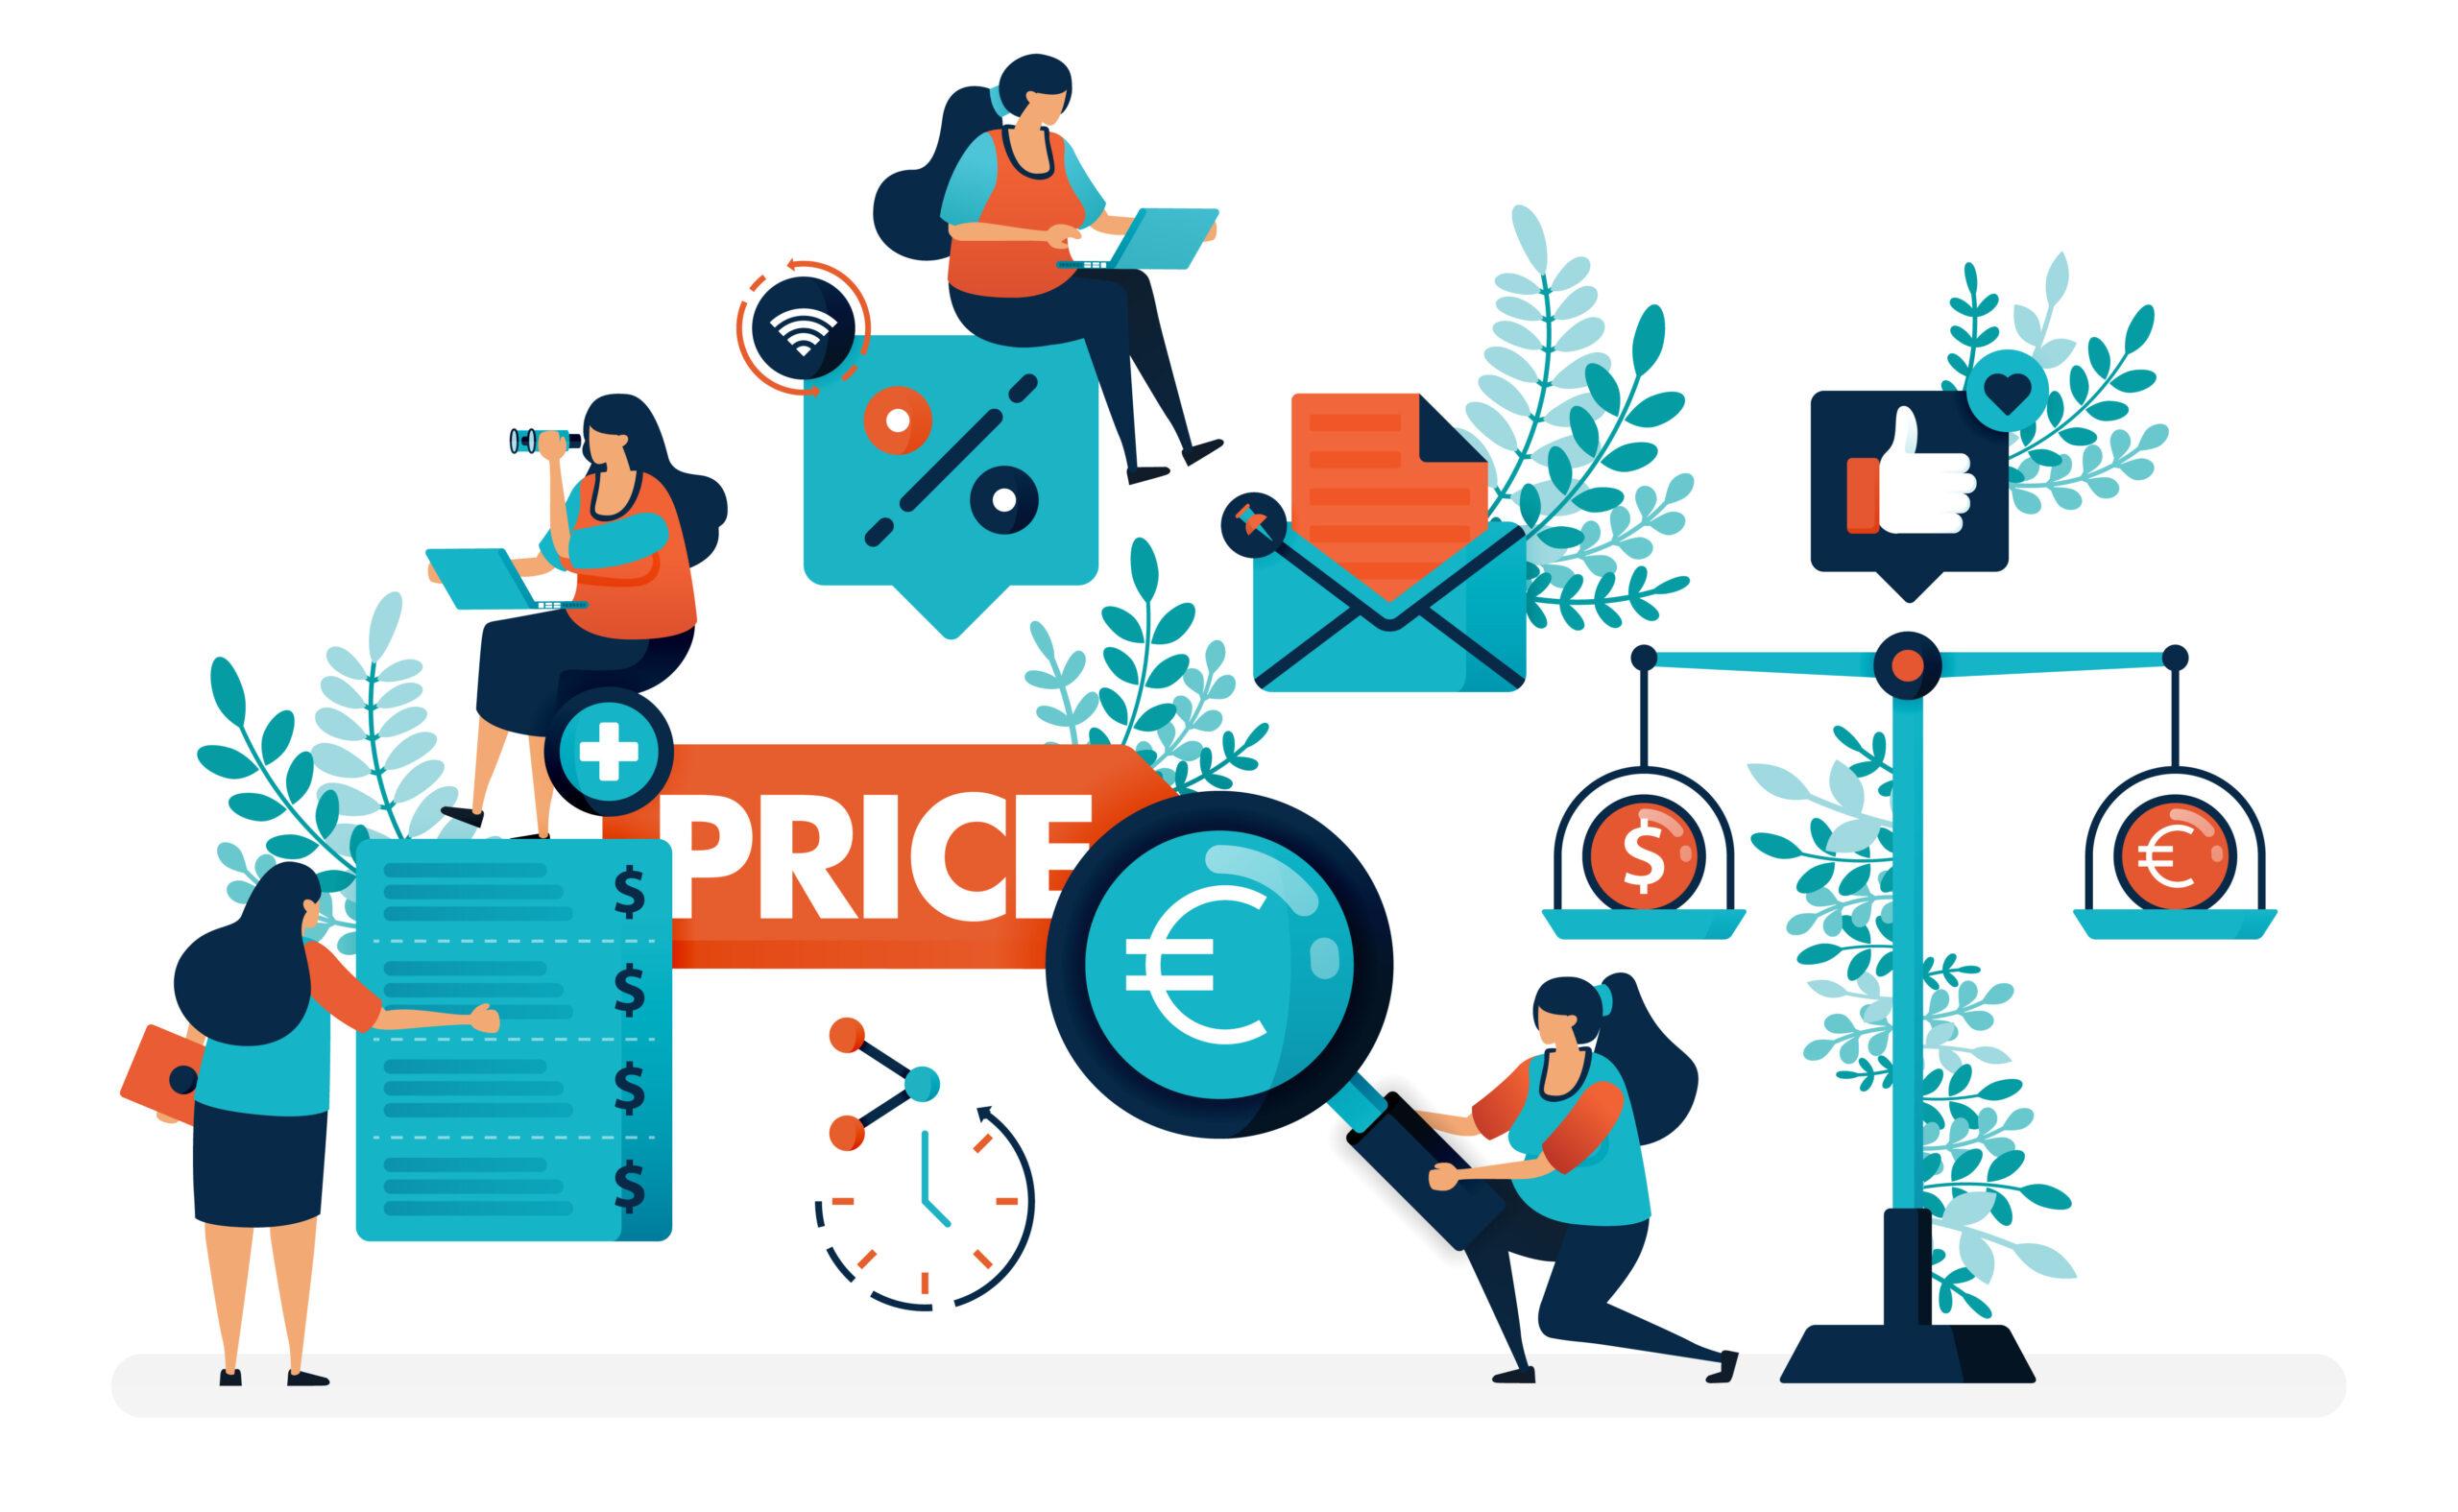 Compare prices for individual stores and products. Find the best prices with more discounts and promos. Flat vector illustration for landing page, web, website, banner, mobile apps, flyer, poster